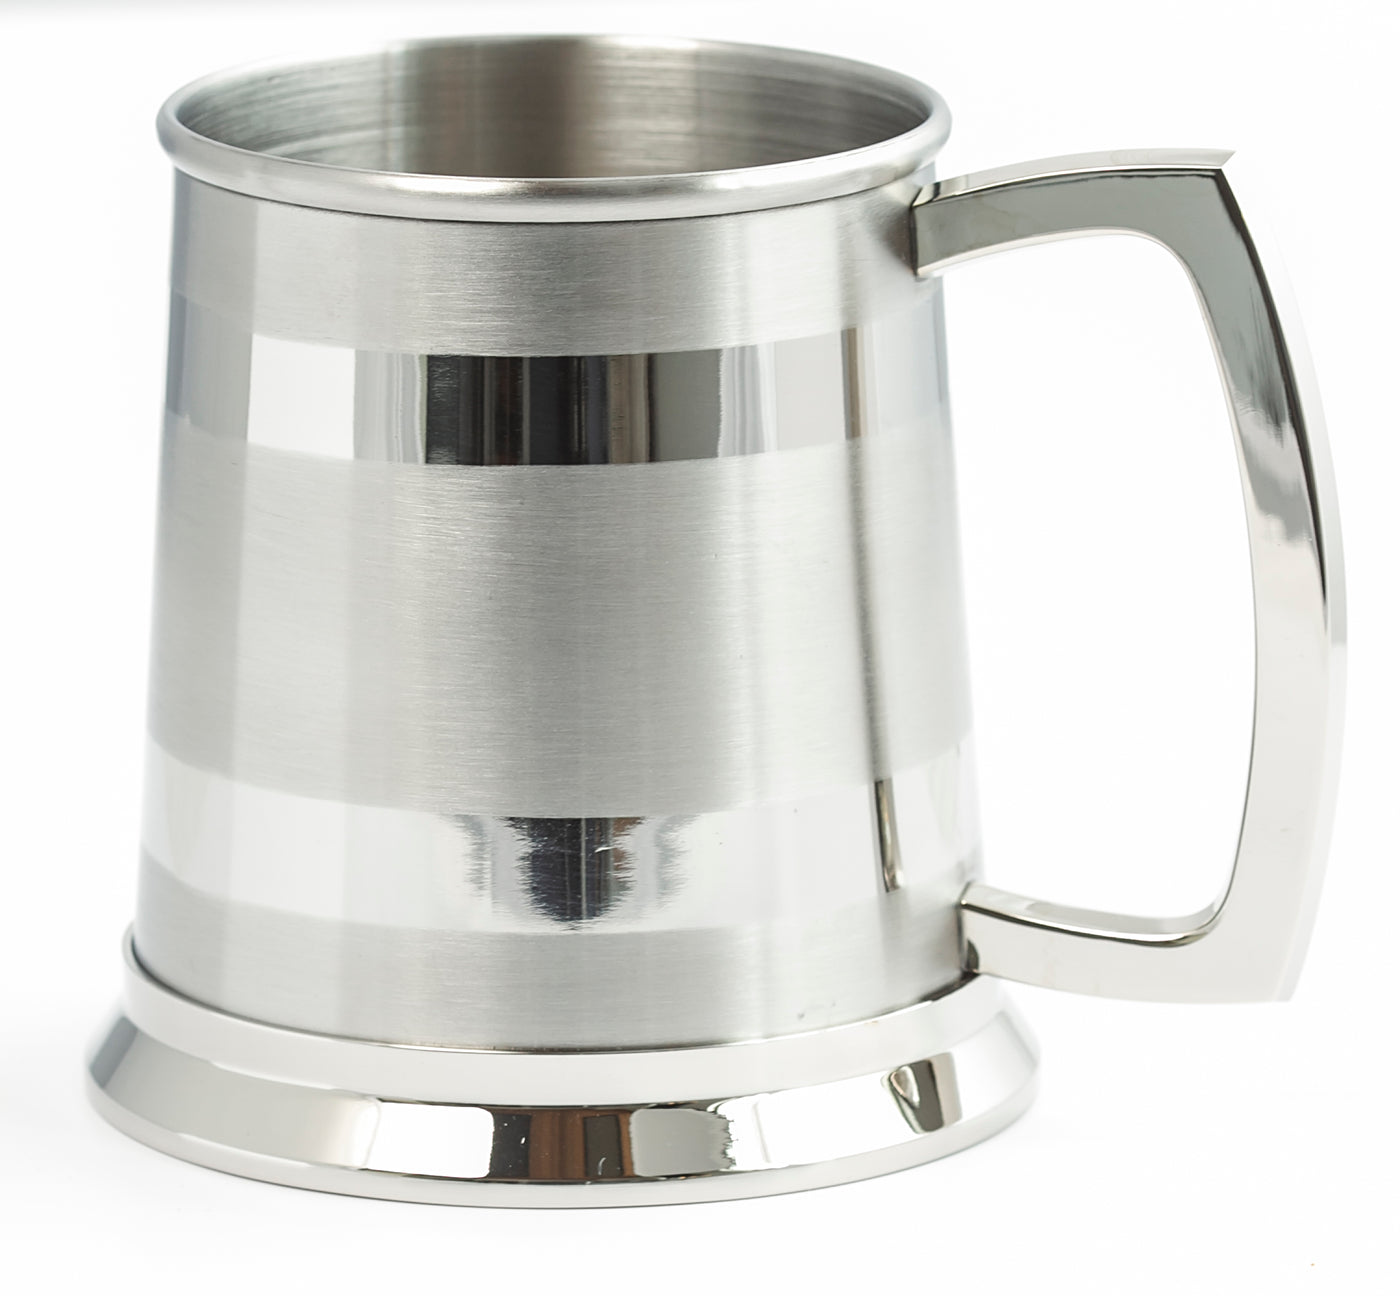 COUNTRY JEWEL TANKARD STAINLESS STEEL - 1 PINT